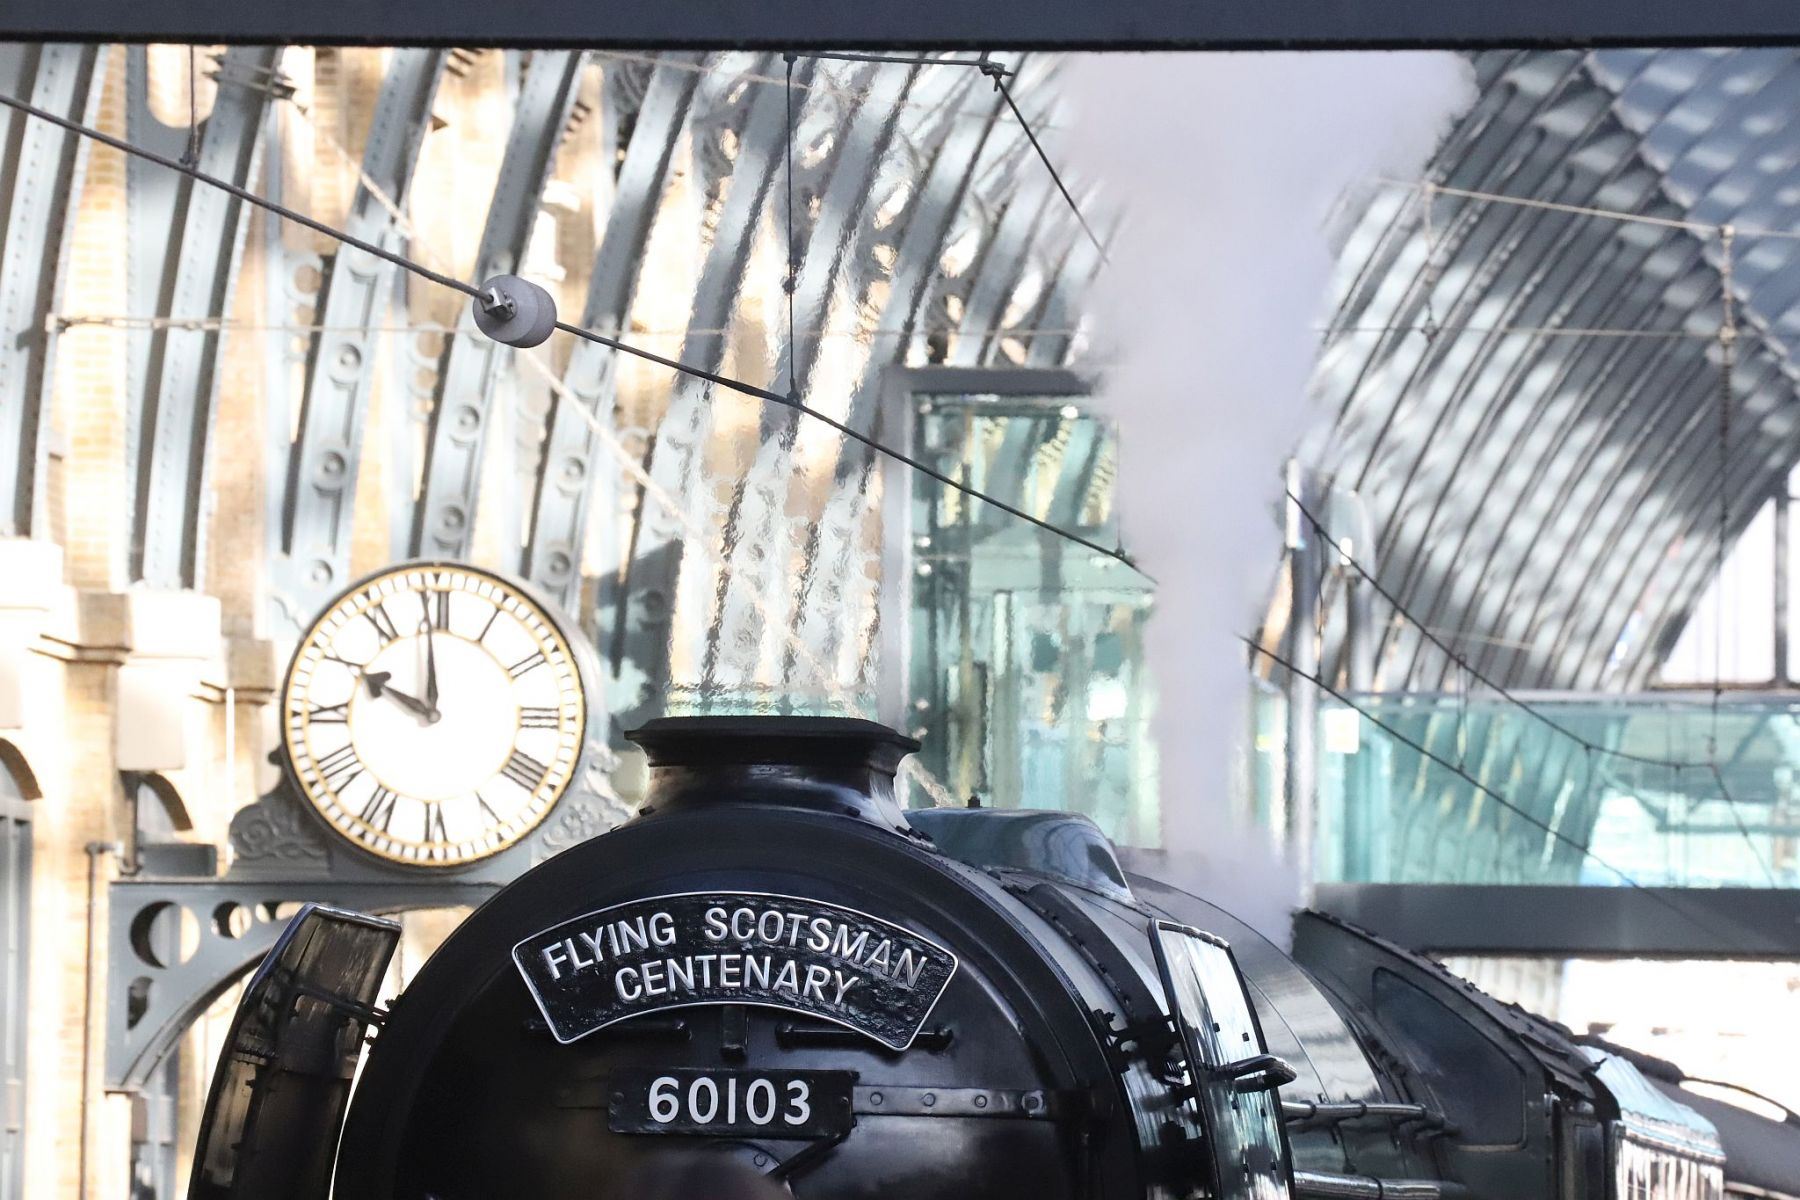 Flying Scotsman's whistle blows just before the 10:00am departure at King's Cross railway station platform 8